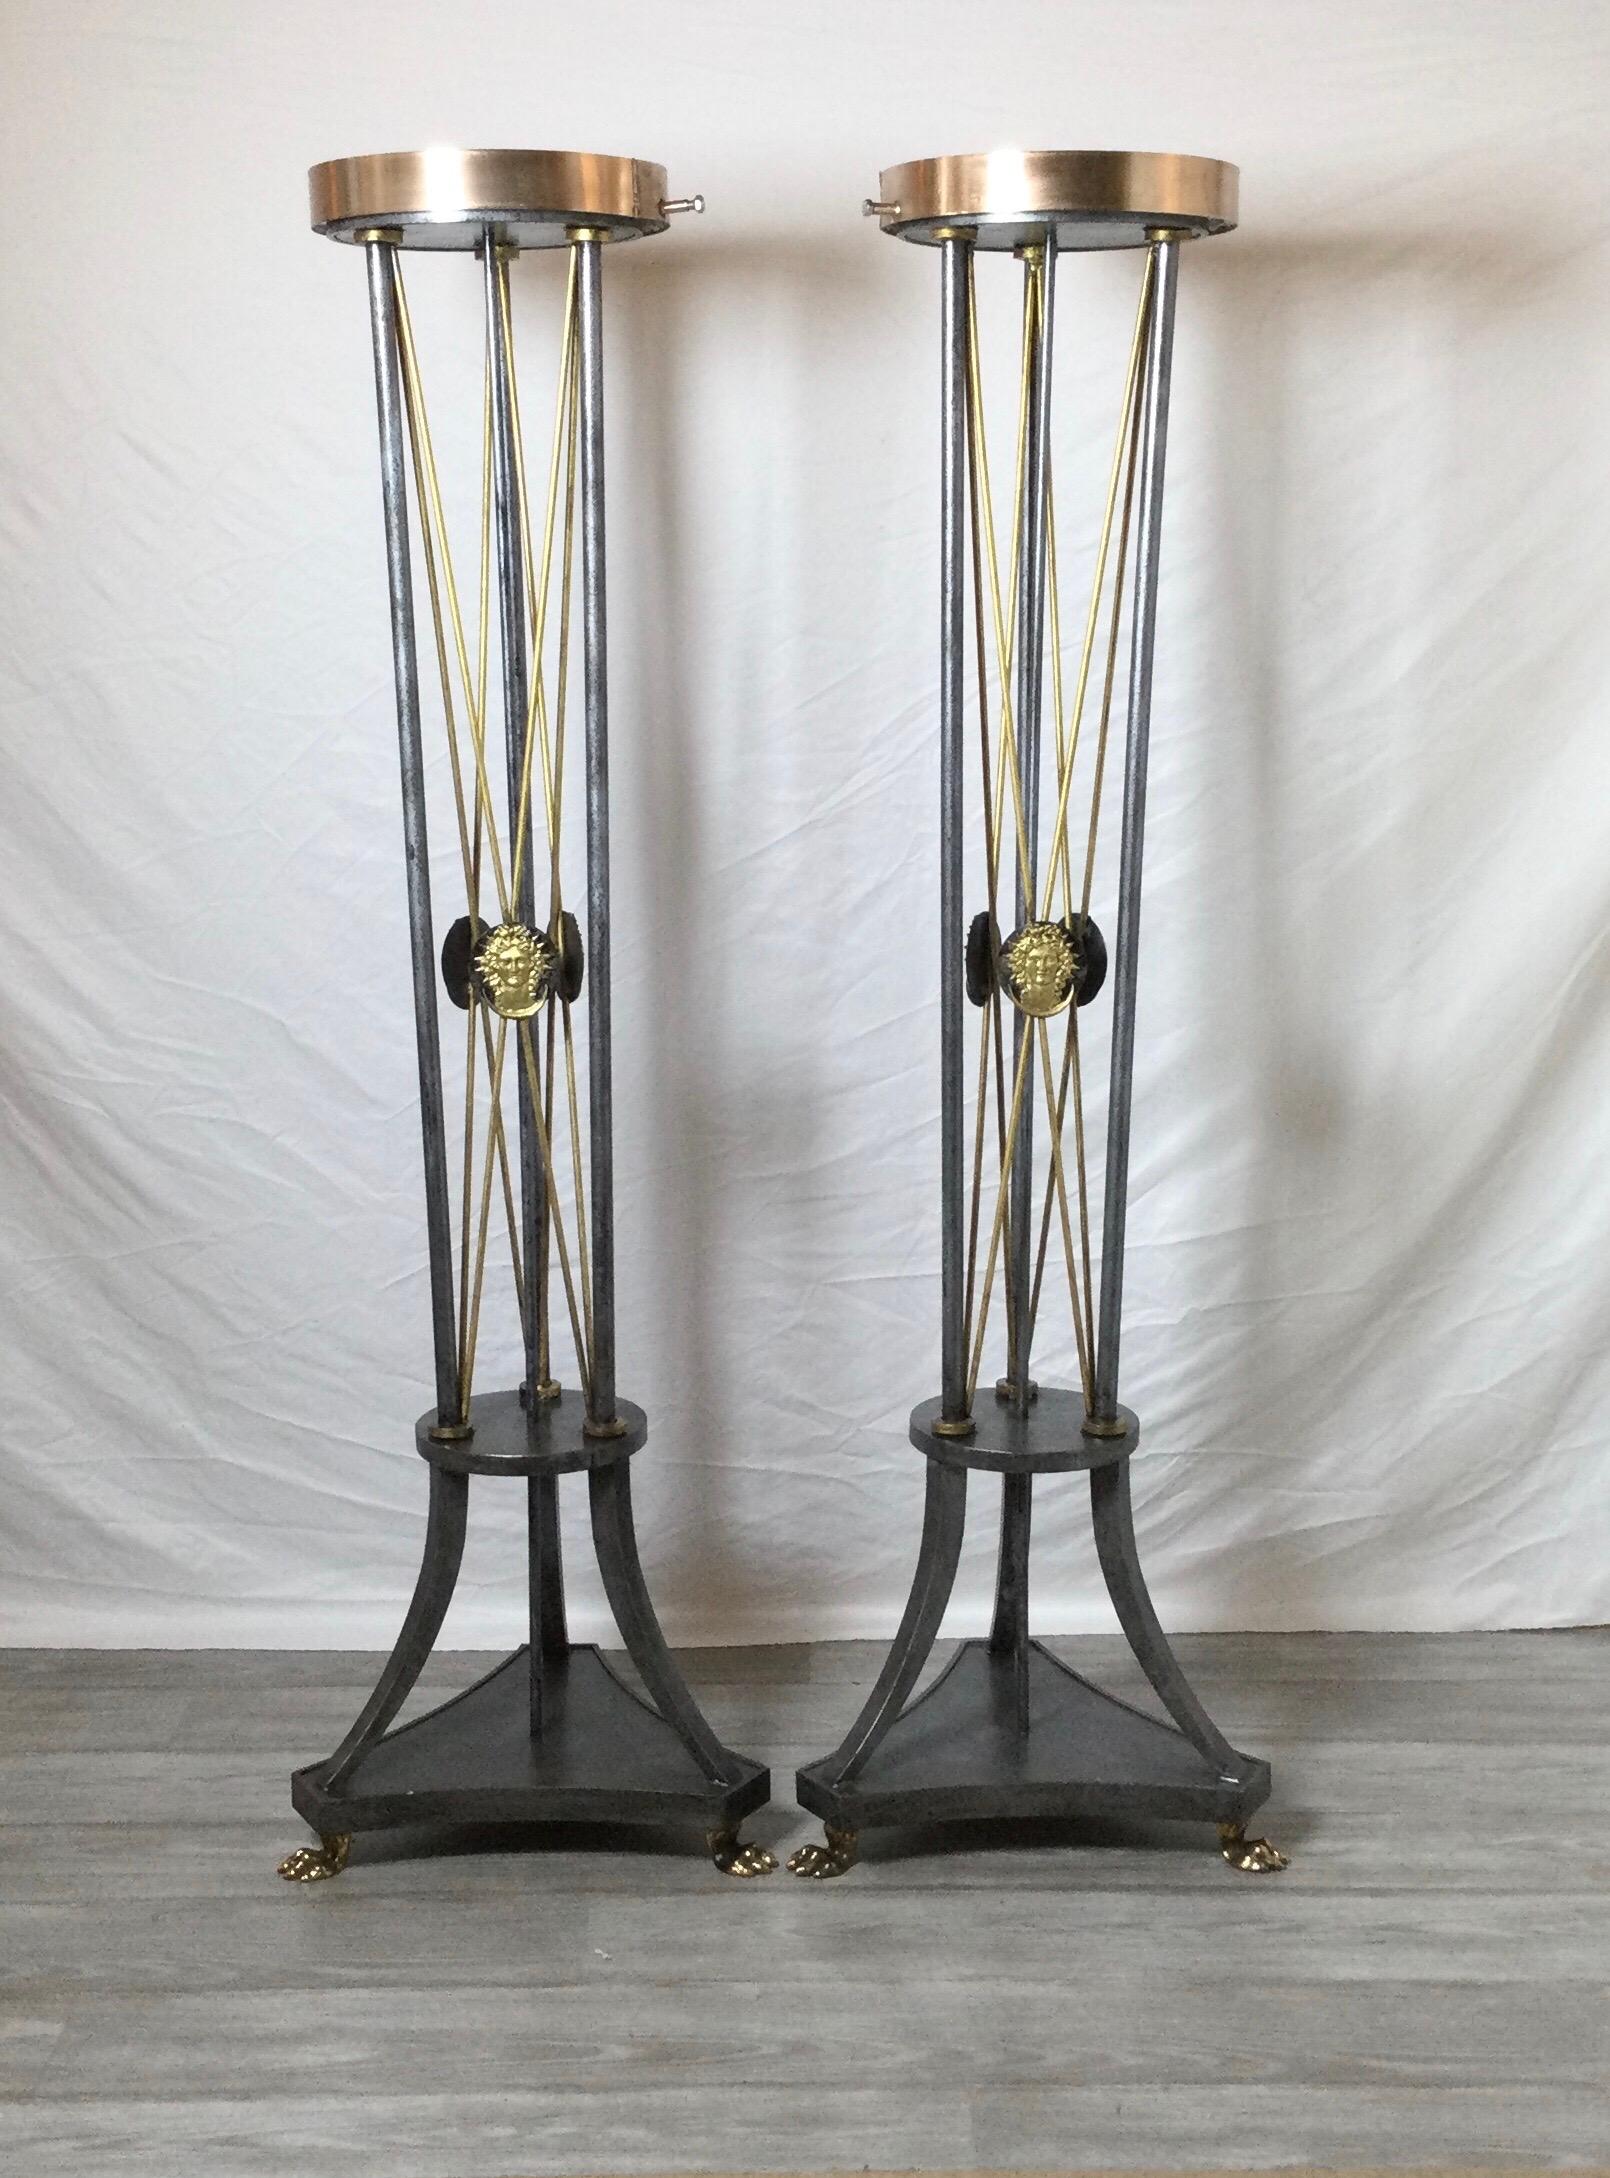 Pair Of Directoire' Style Tall Pedestal stands, Made of polished and painted iron with brass rods and paw feet. Structurally designed and made to hold and support heavy plants or objects.
Dimensions: 56.50